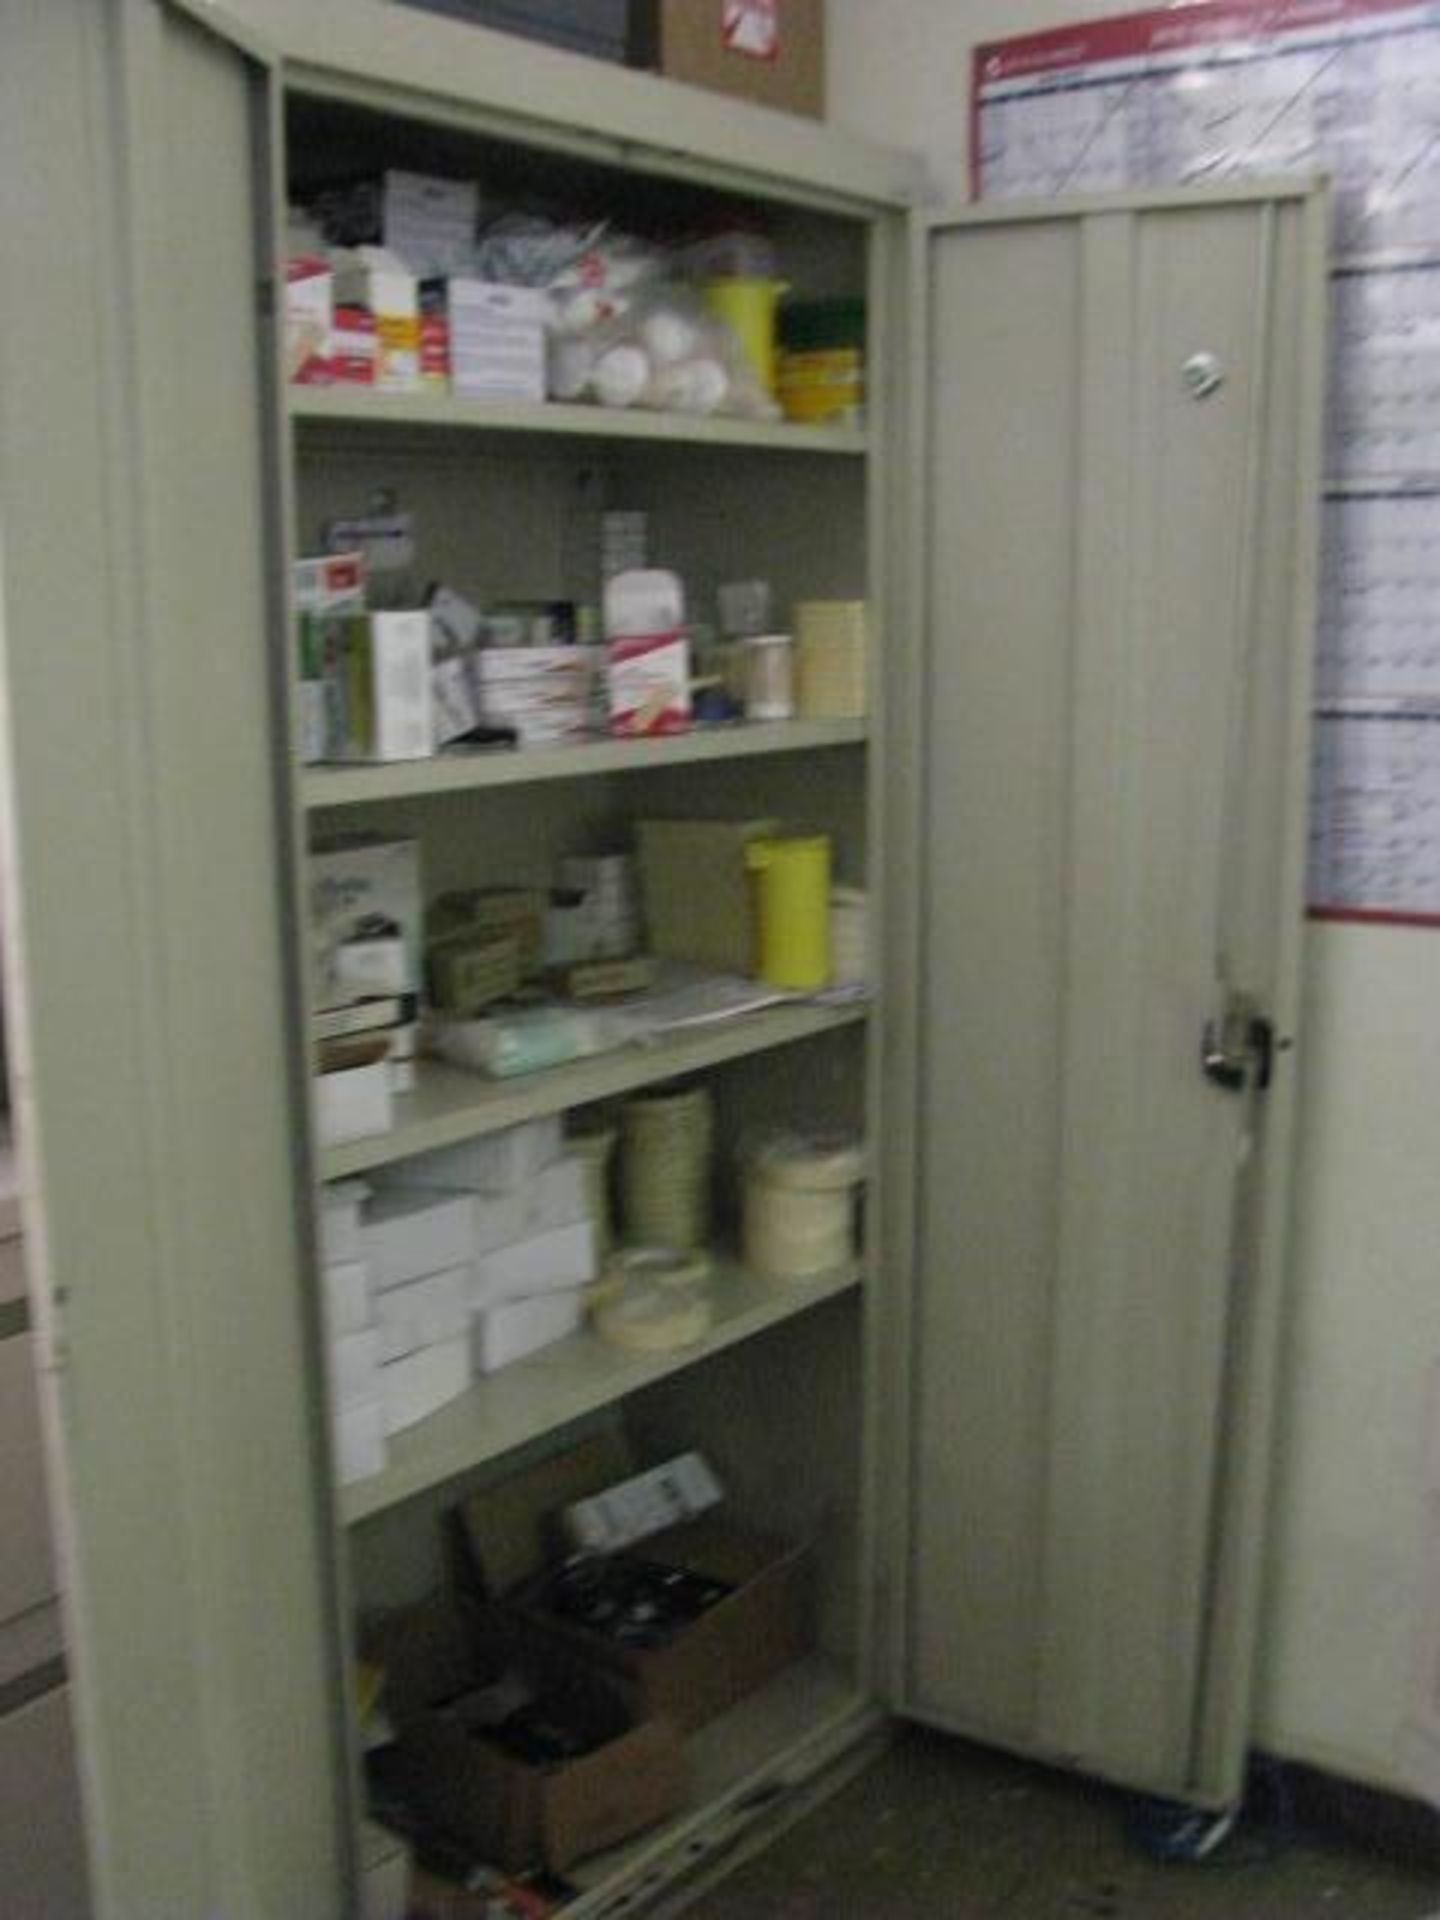 2 Door Metal Utility Cabinet w/ Sundrie Contents. Asset Location: Inserting Room, Site Location: